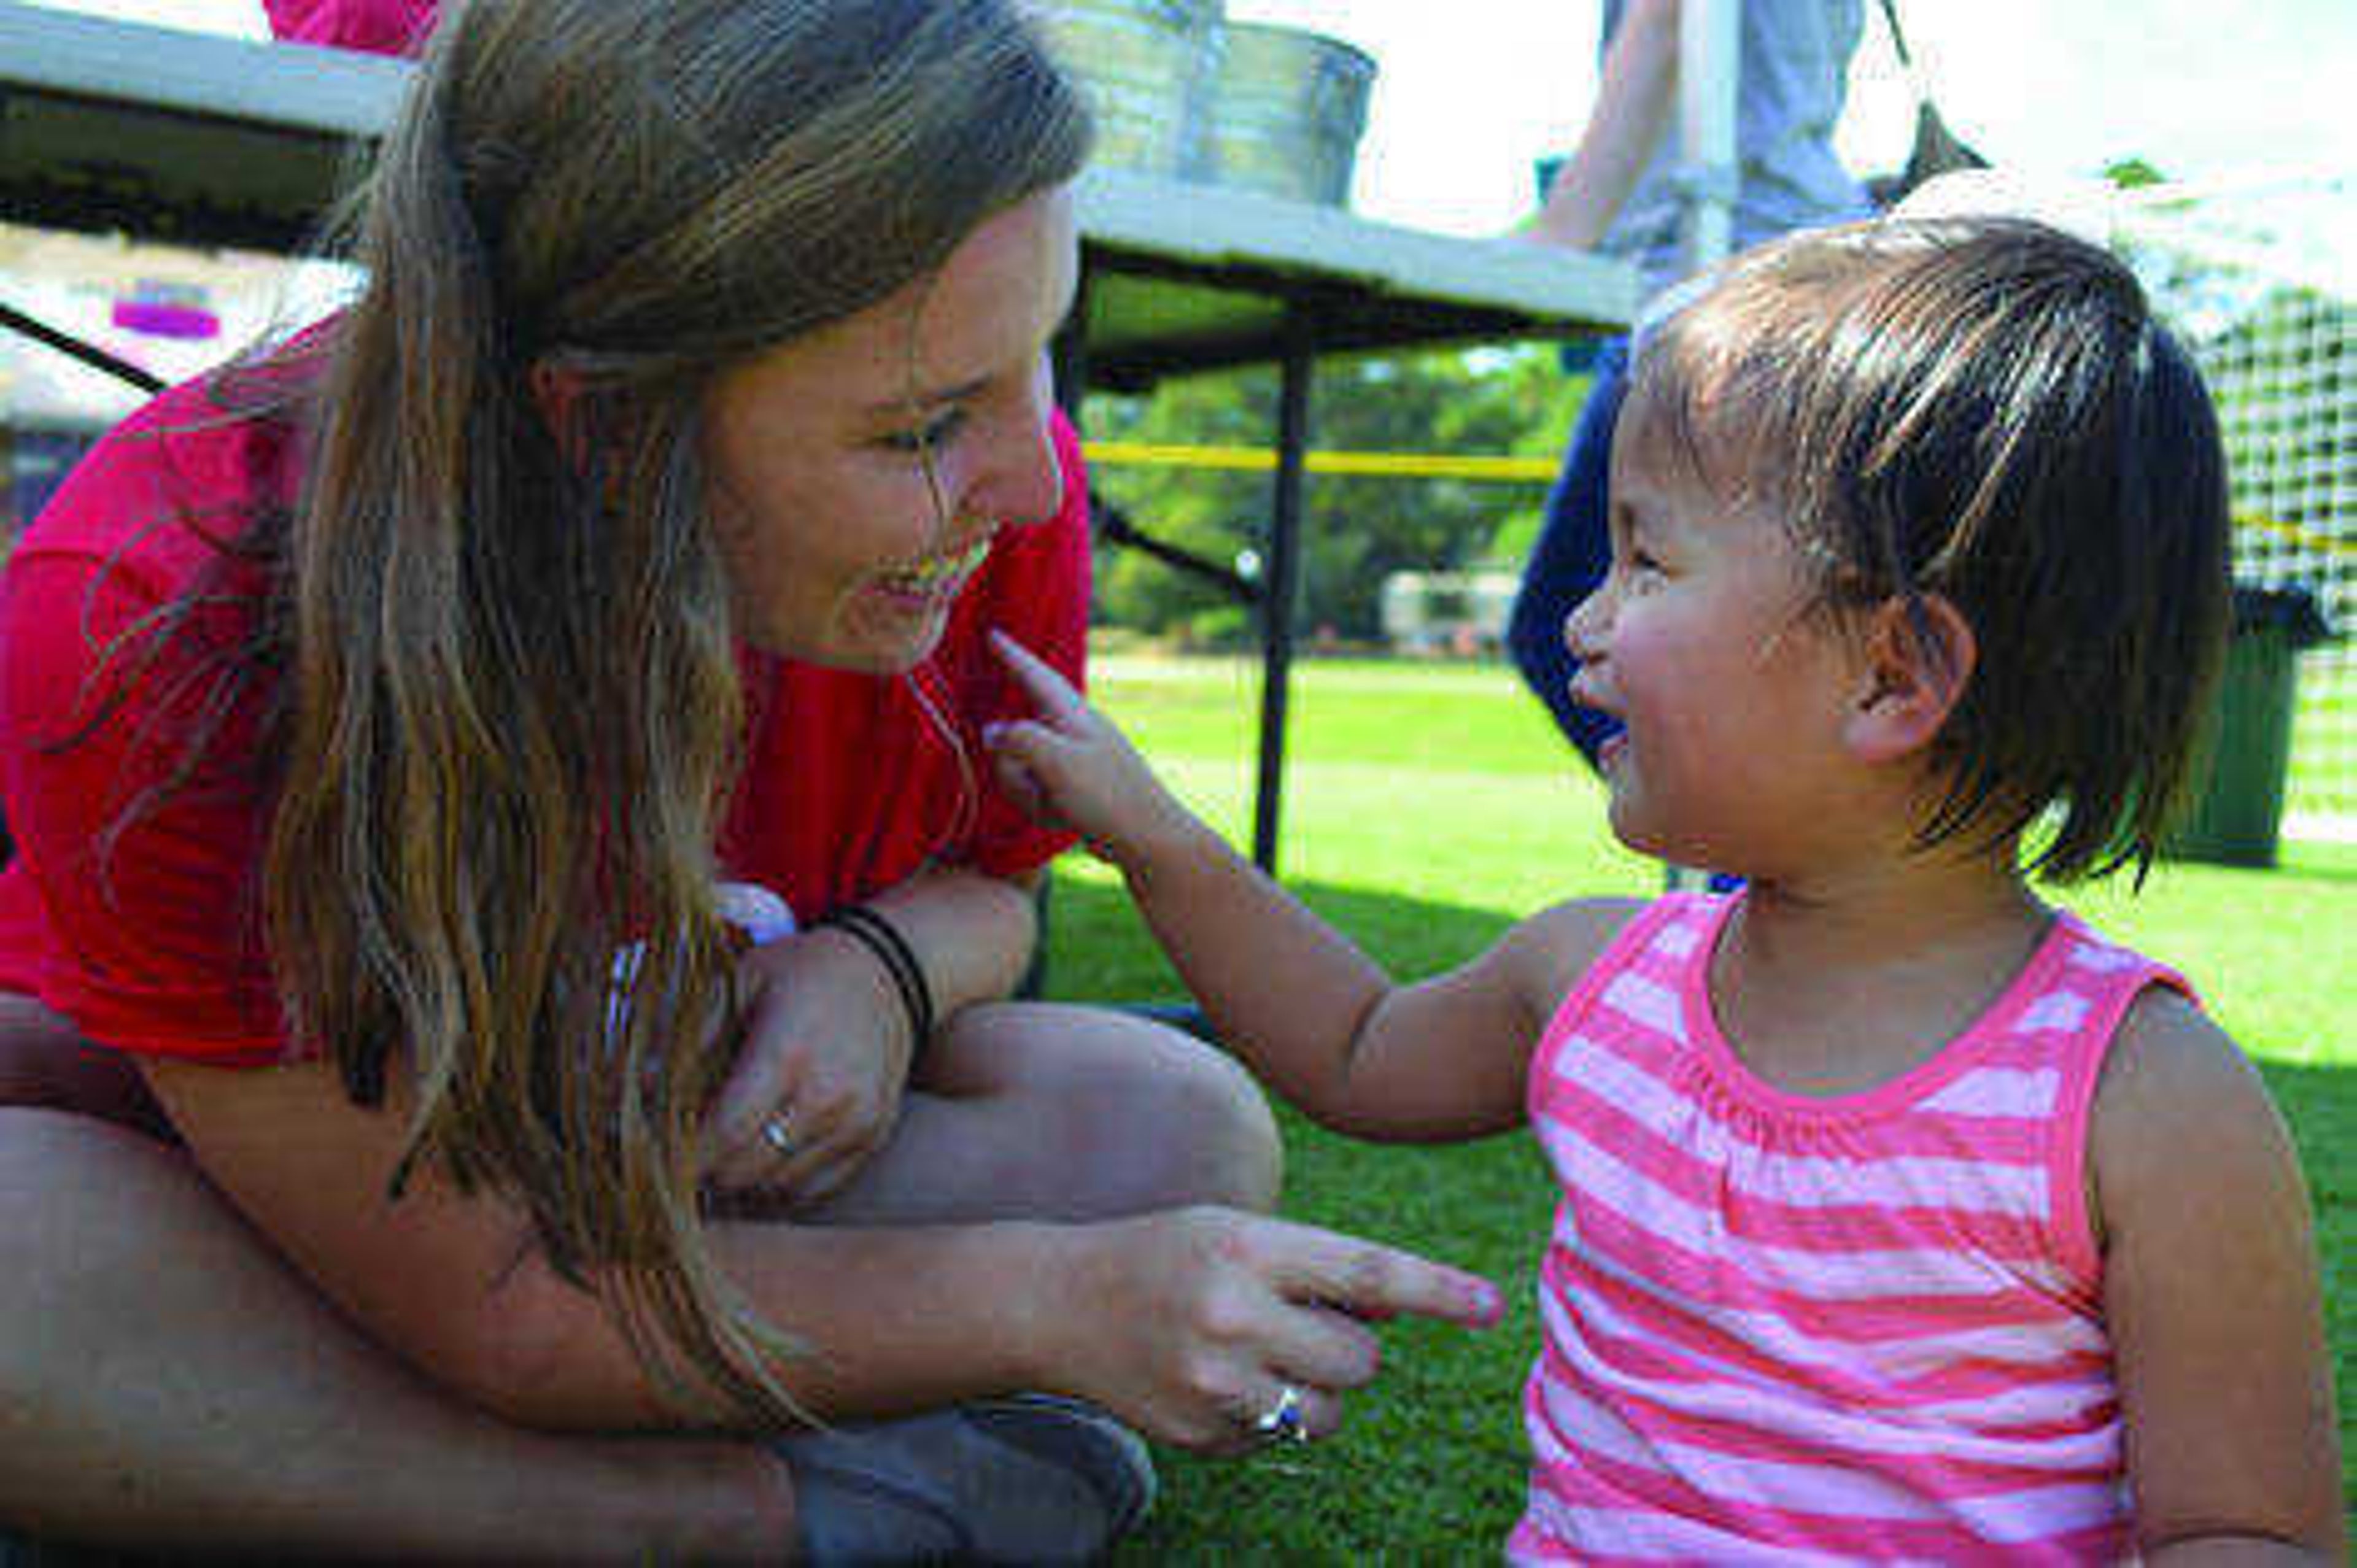 Kelly Lu Holder and a girl named Ellie, who was adopted, playing at Belhaven University during a Red Bus Project tour. Photo by Rebecca Foster.